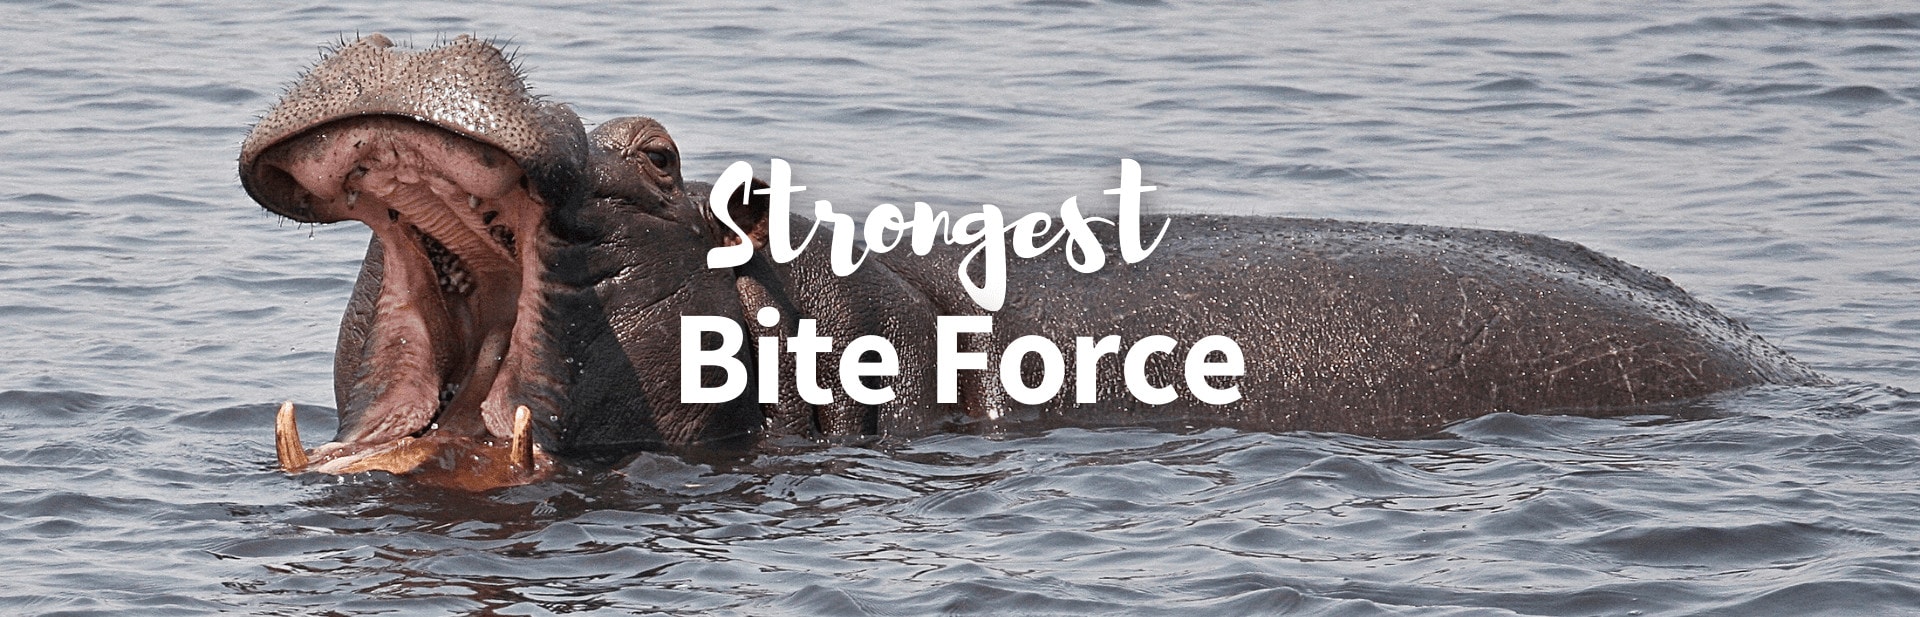 16+ Strongest Bite Force in the Animal Kingdom